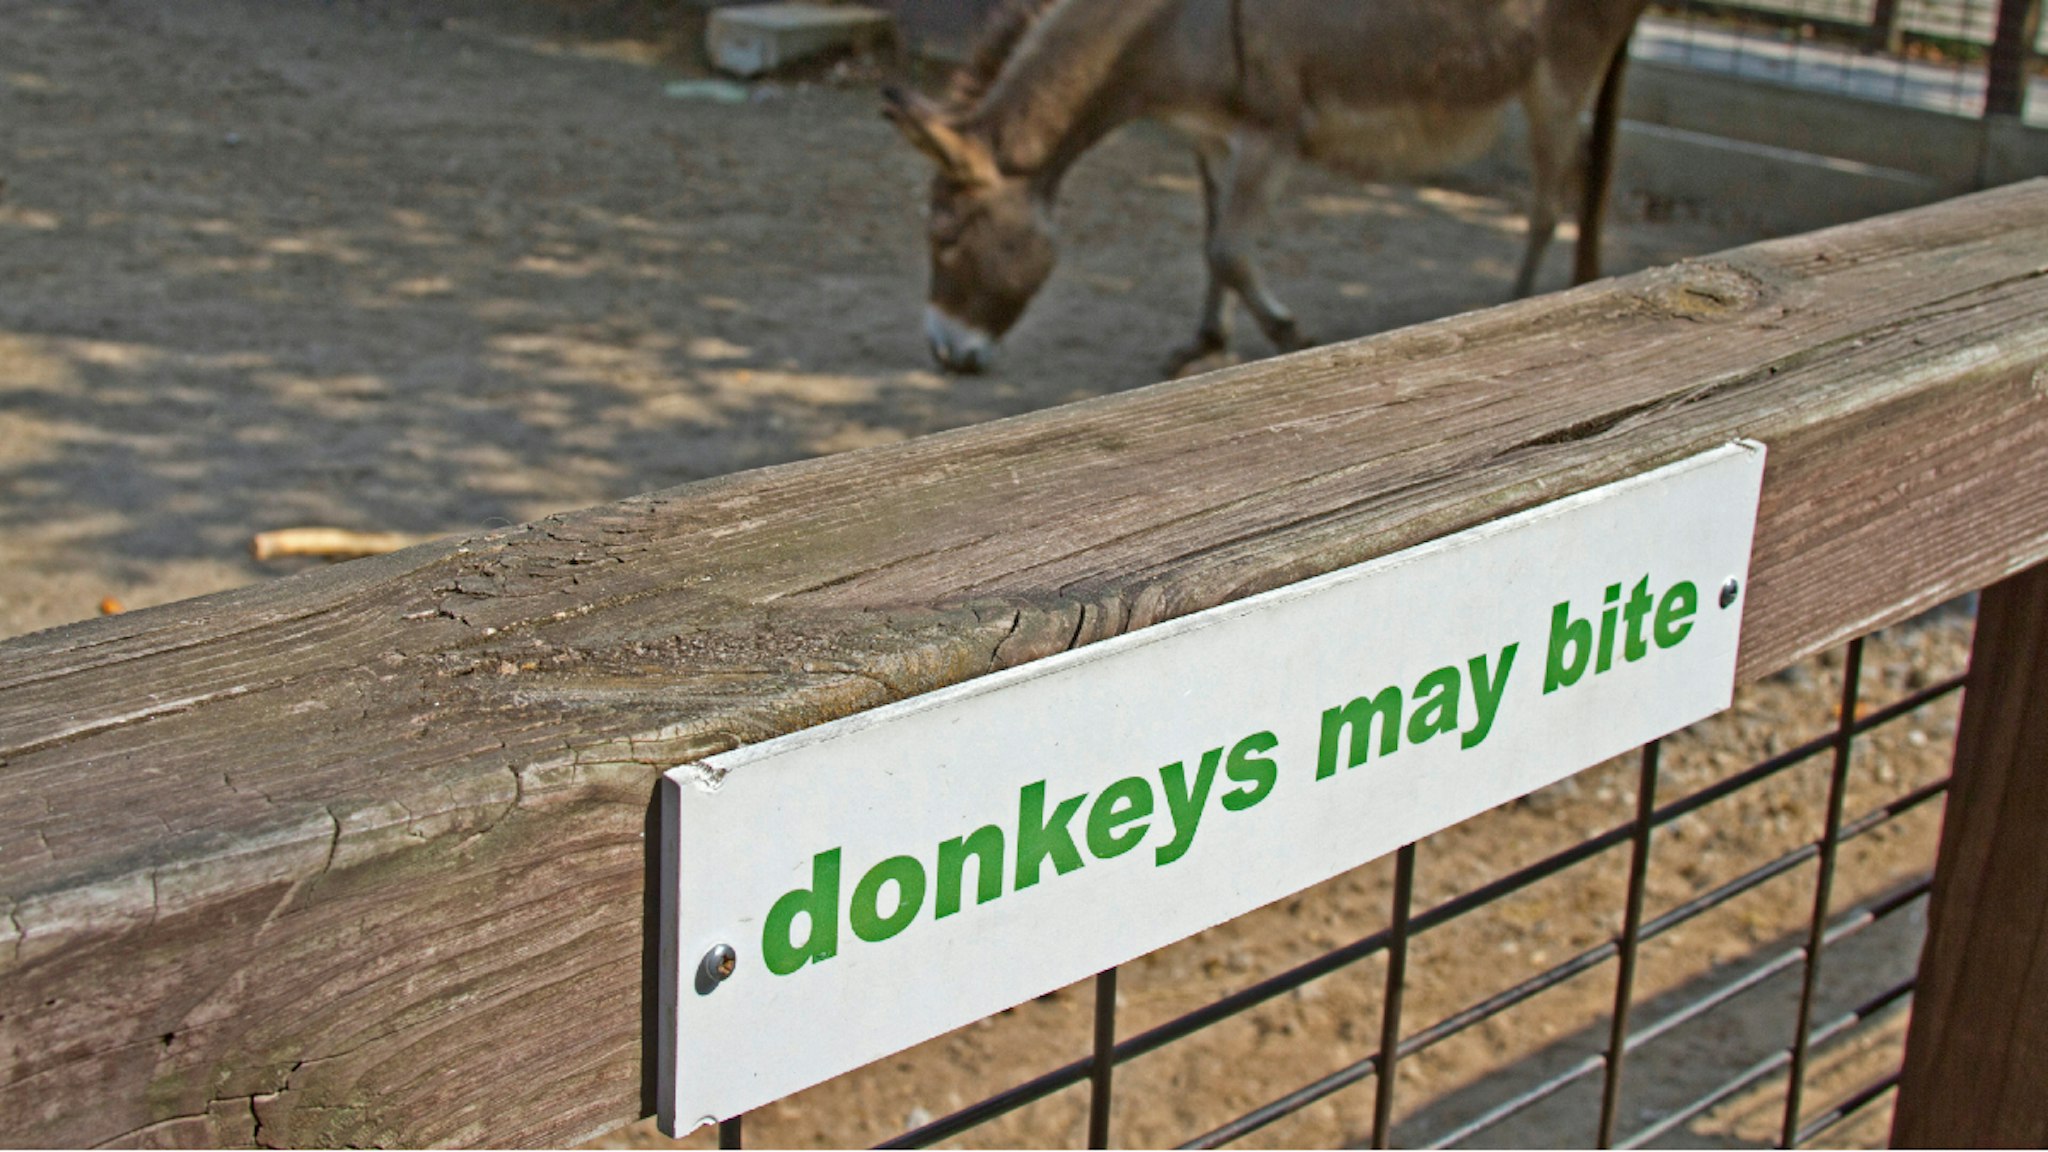 A sign in the foreground saying that donkeys may bite with a donkey in a pen behind it which can be symbolic of the Democratic Party